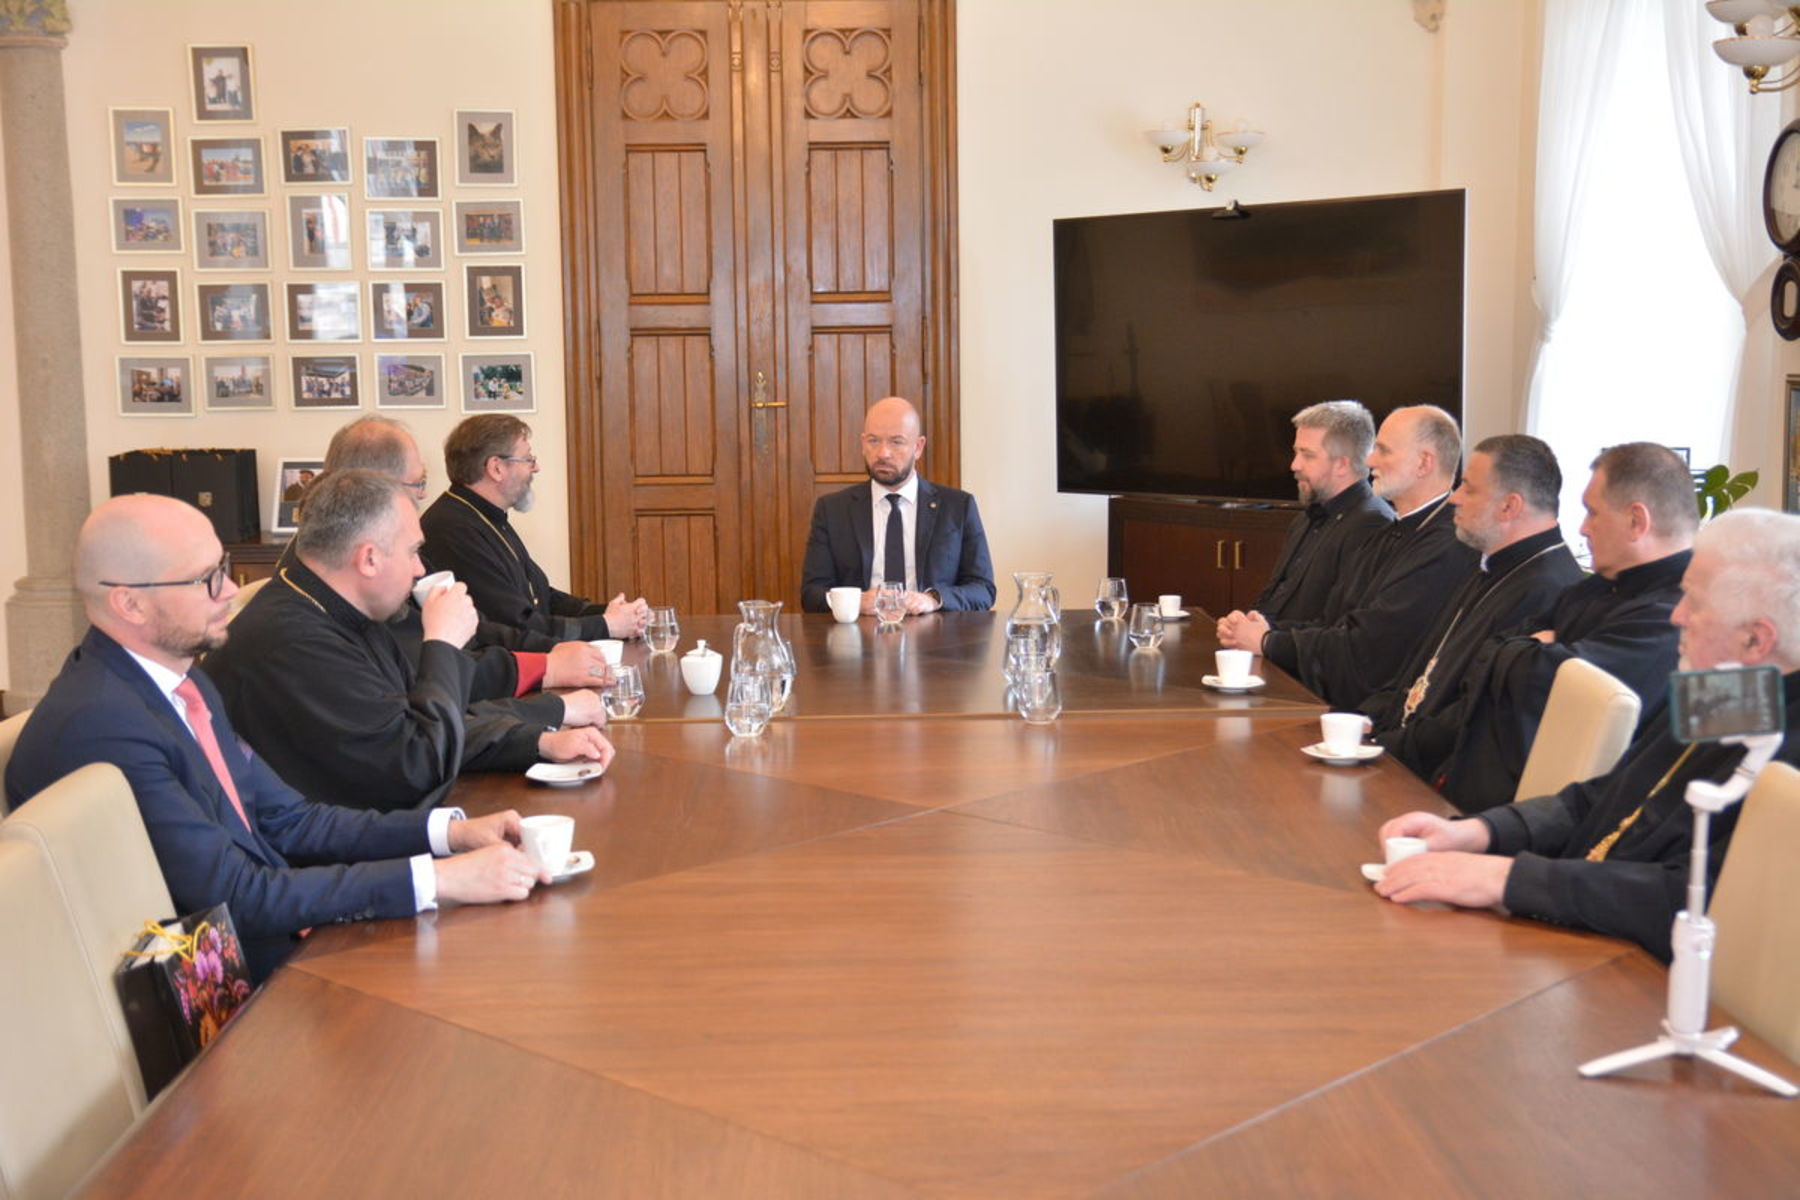 Bishops of the Permanent Synod expressed gratitude to the Mayor of Wroclaw for supporting Ukrainians